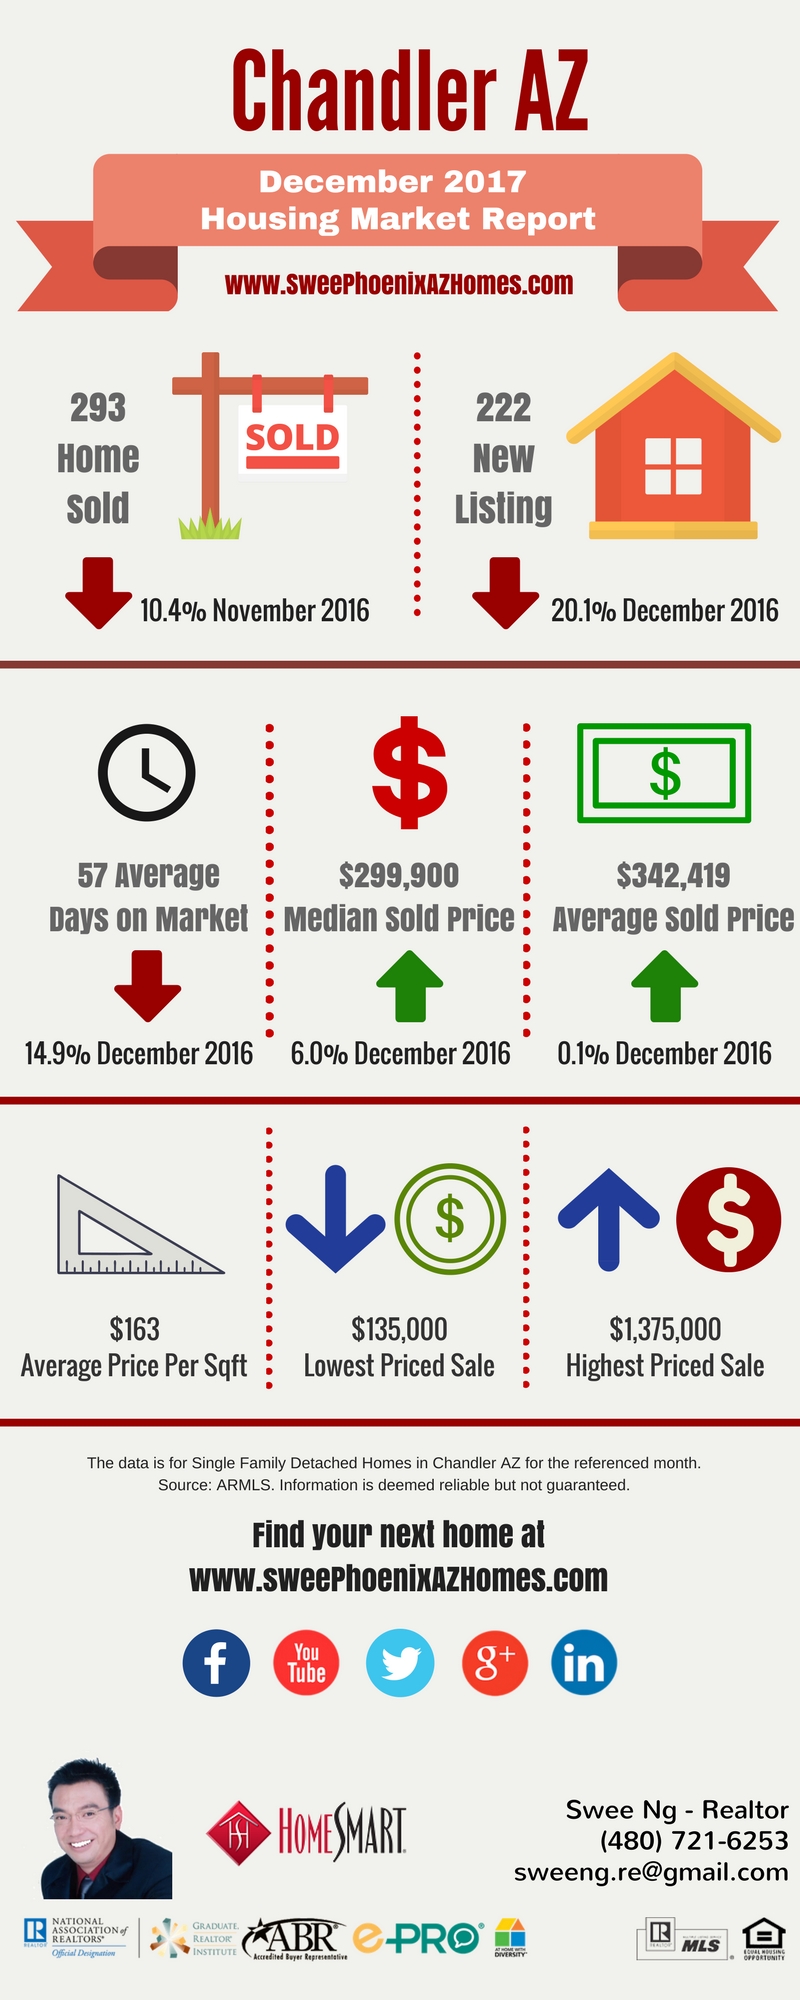 Chandler AZ Housing Market Update December 2017 by Swee Ng, House Value and Real Estate Listings